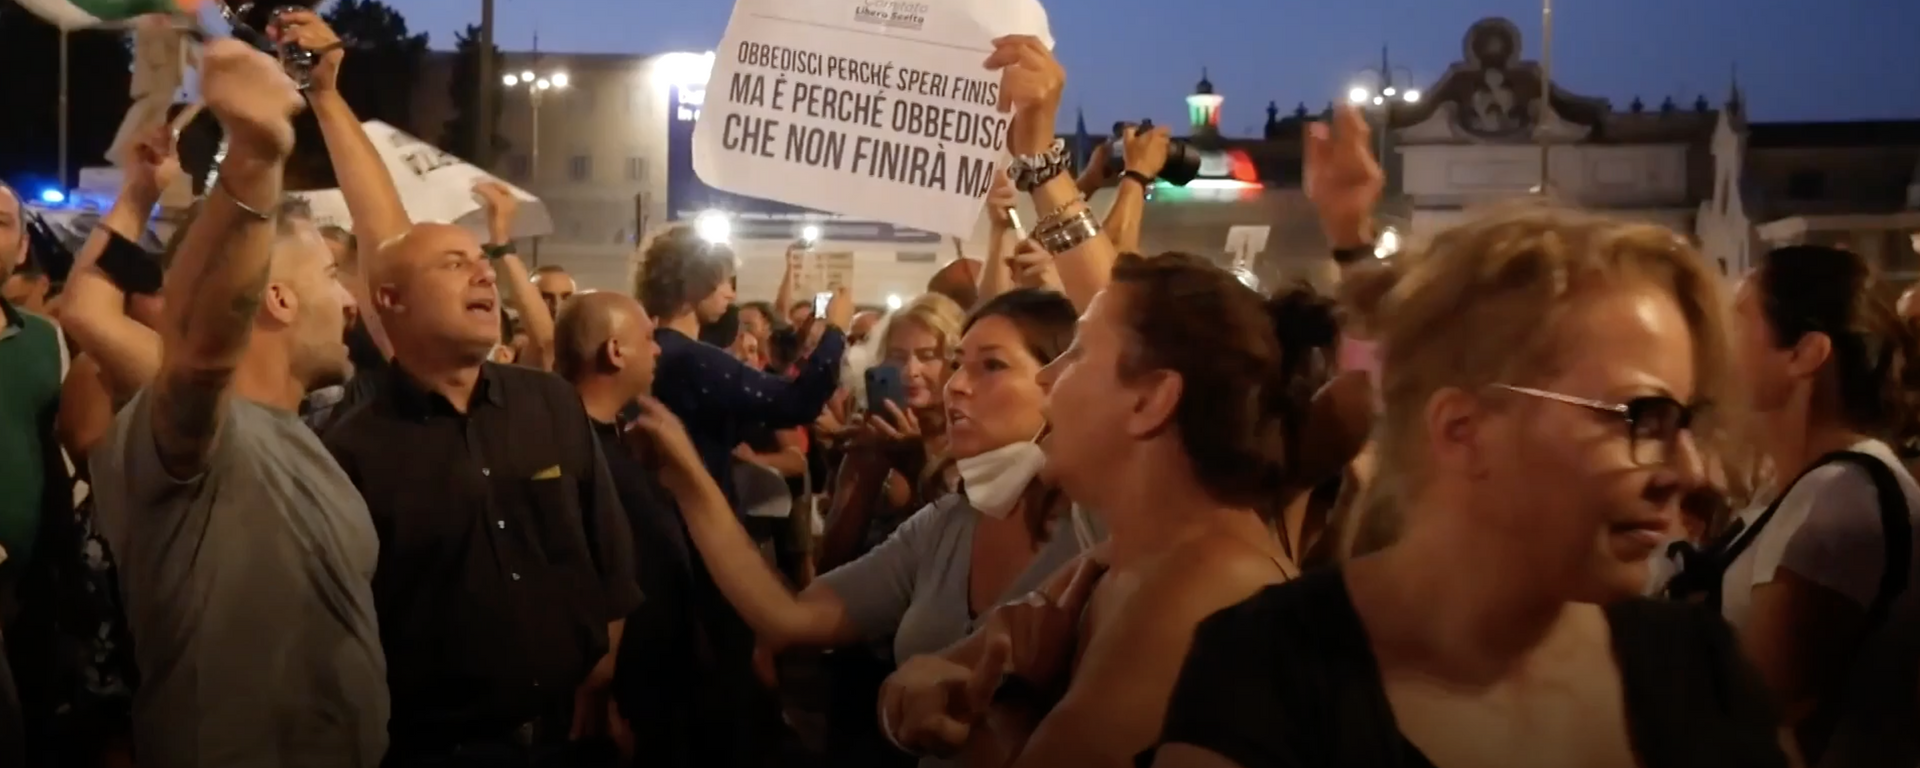 Protesters rally against COVID health pass in Italy and France
 - Sputnik Moldova-România, 1920, 29.07.2021